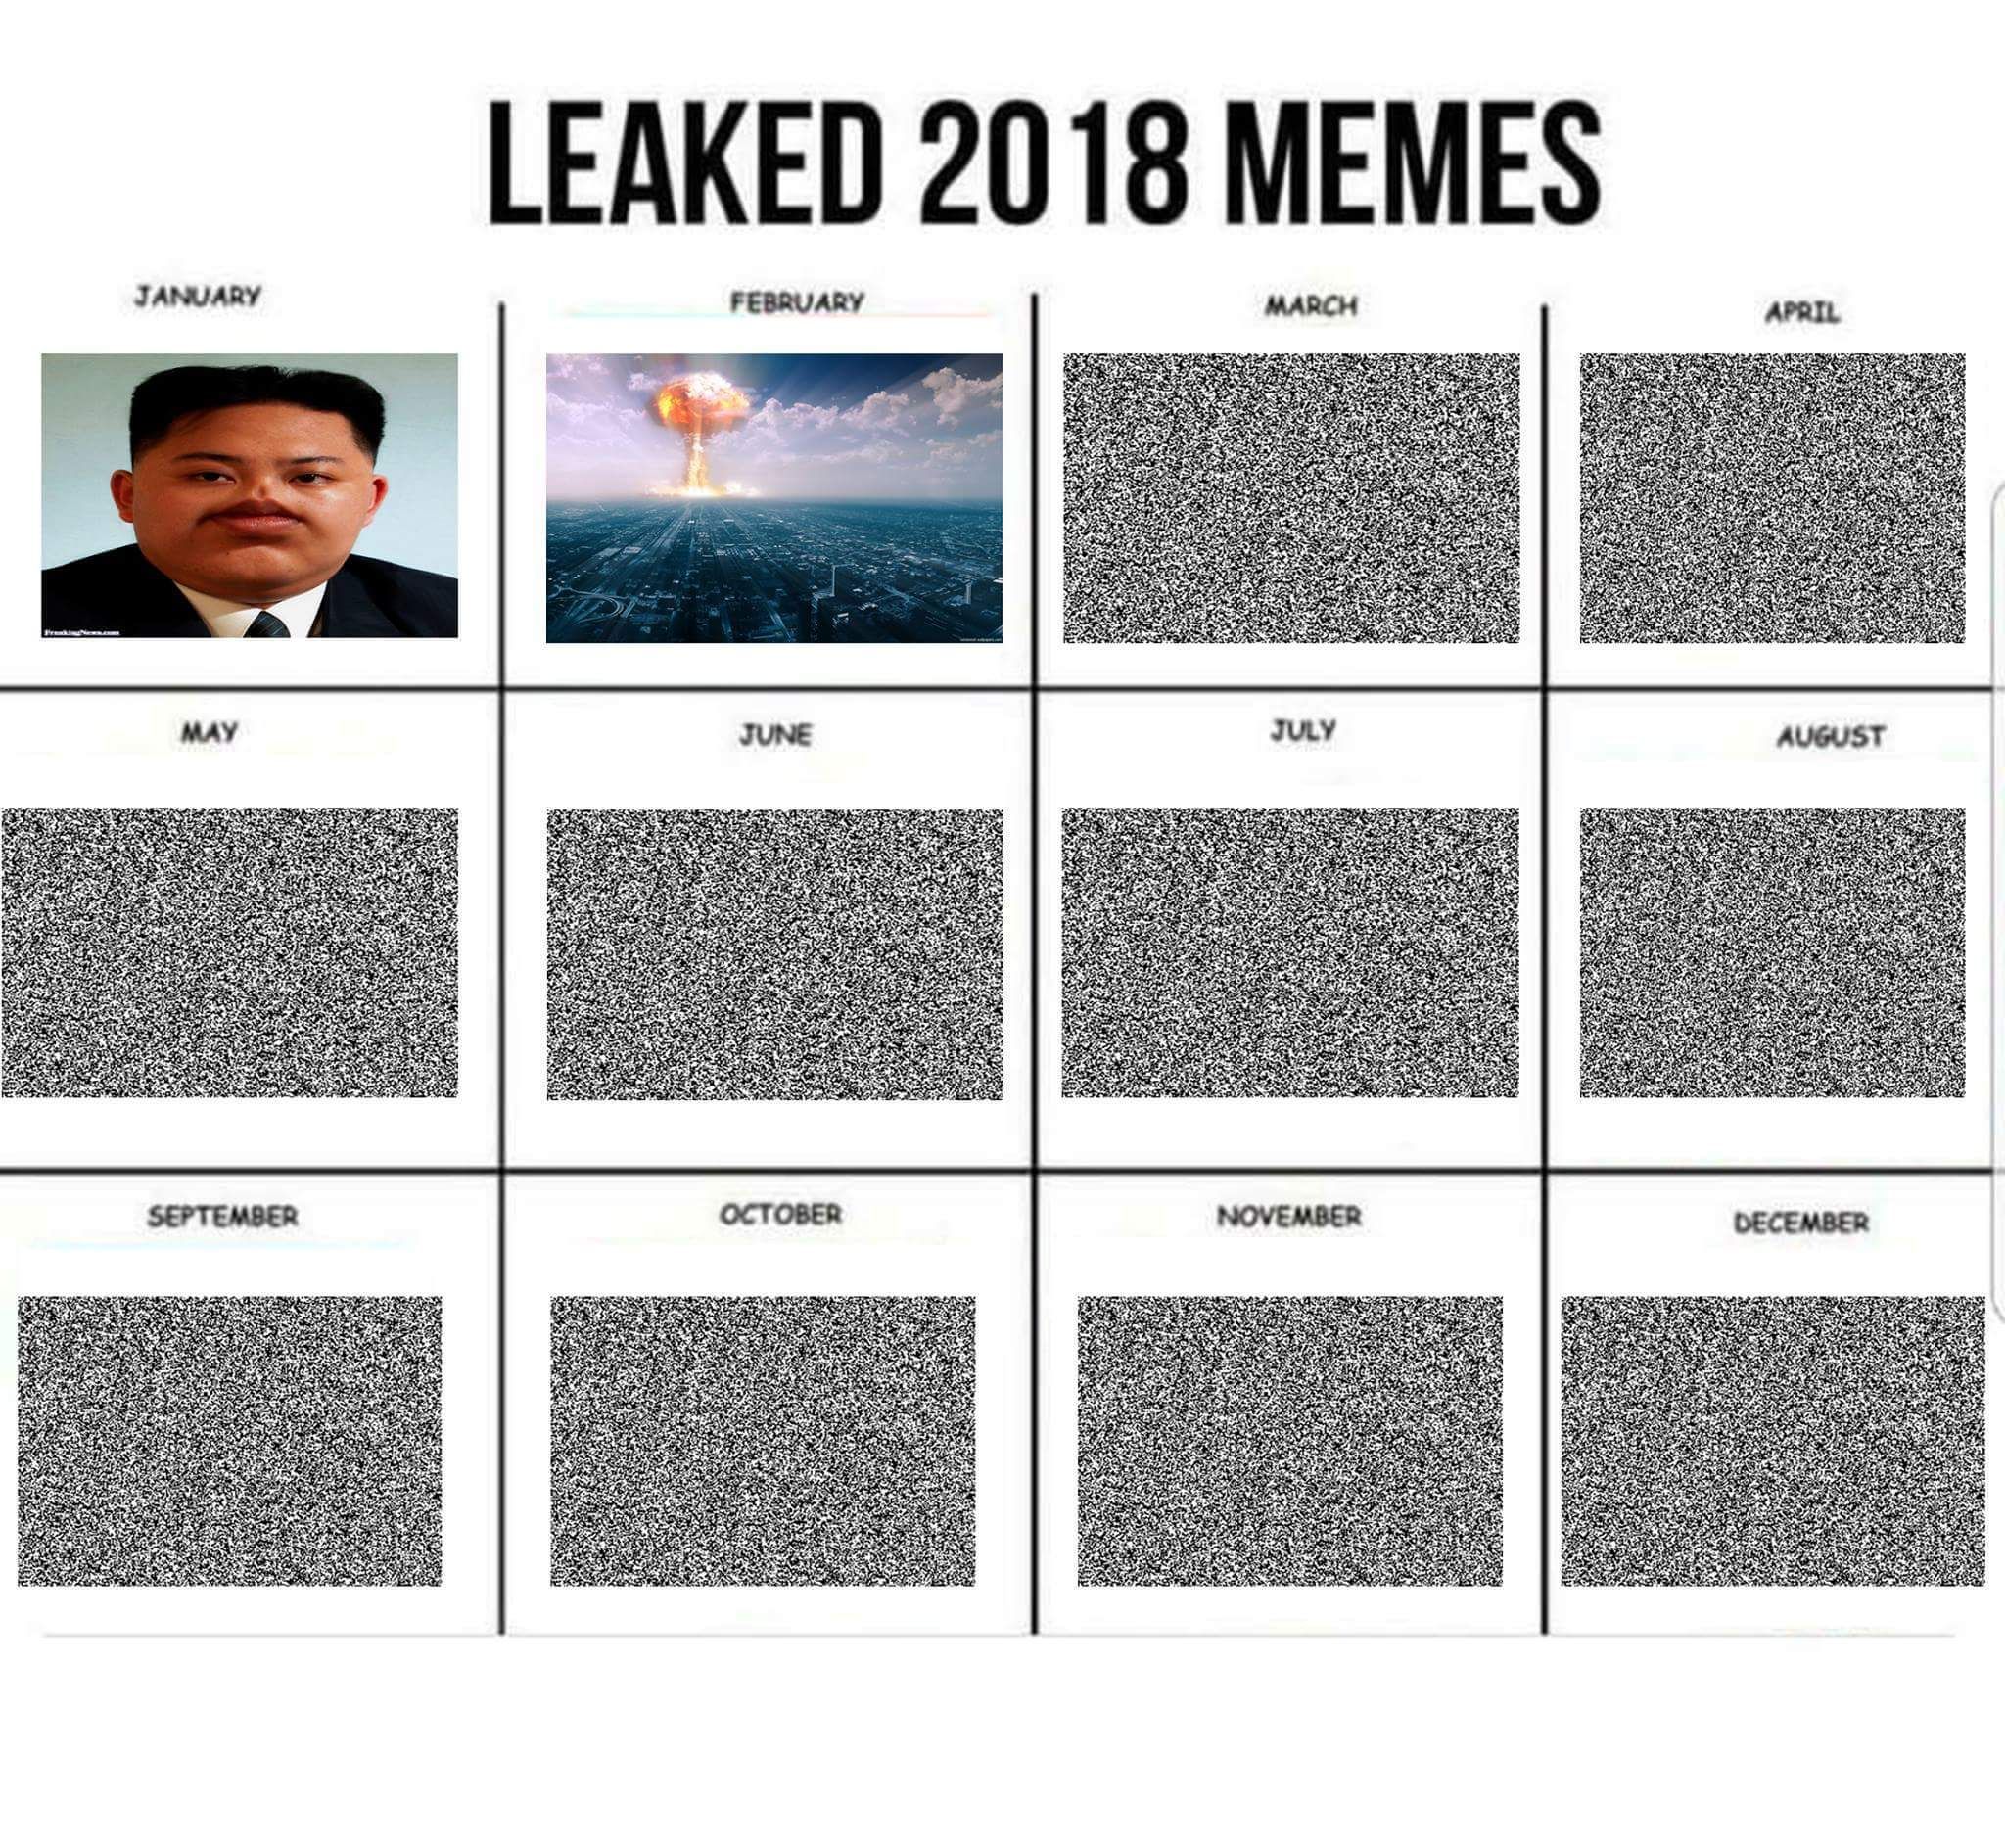 I come from the future with the new meme calendar